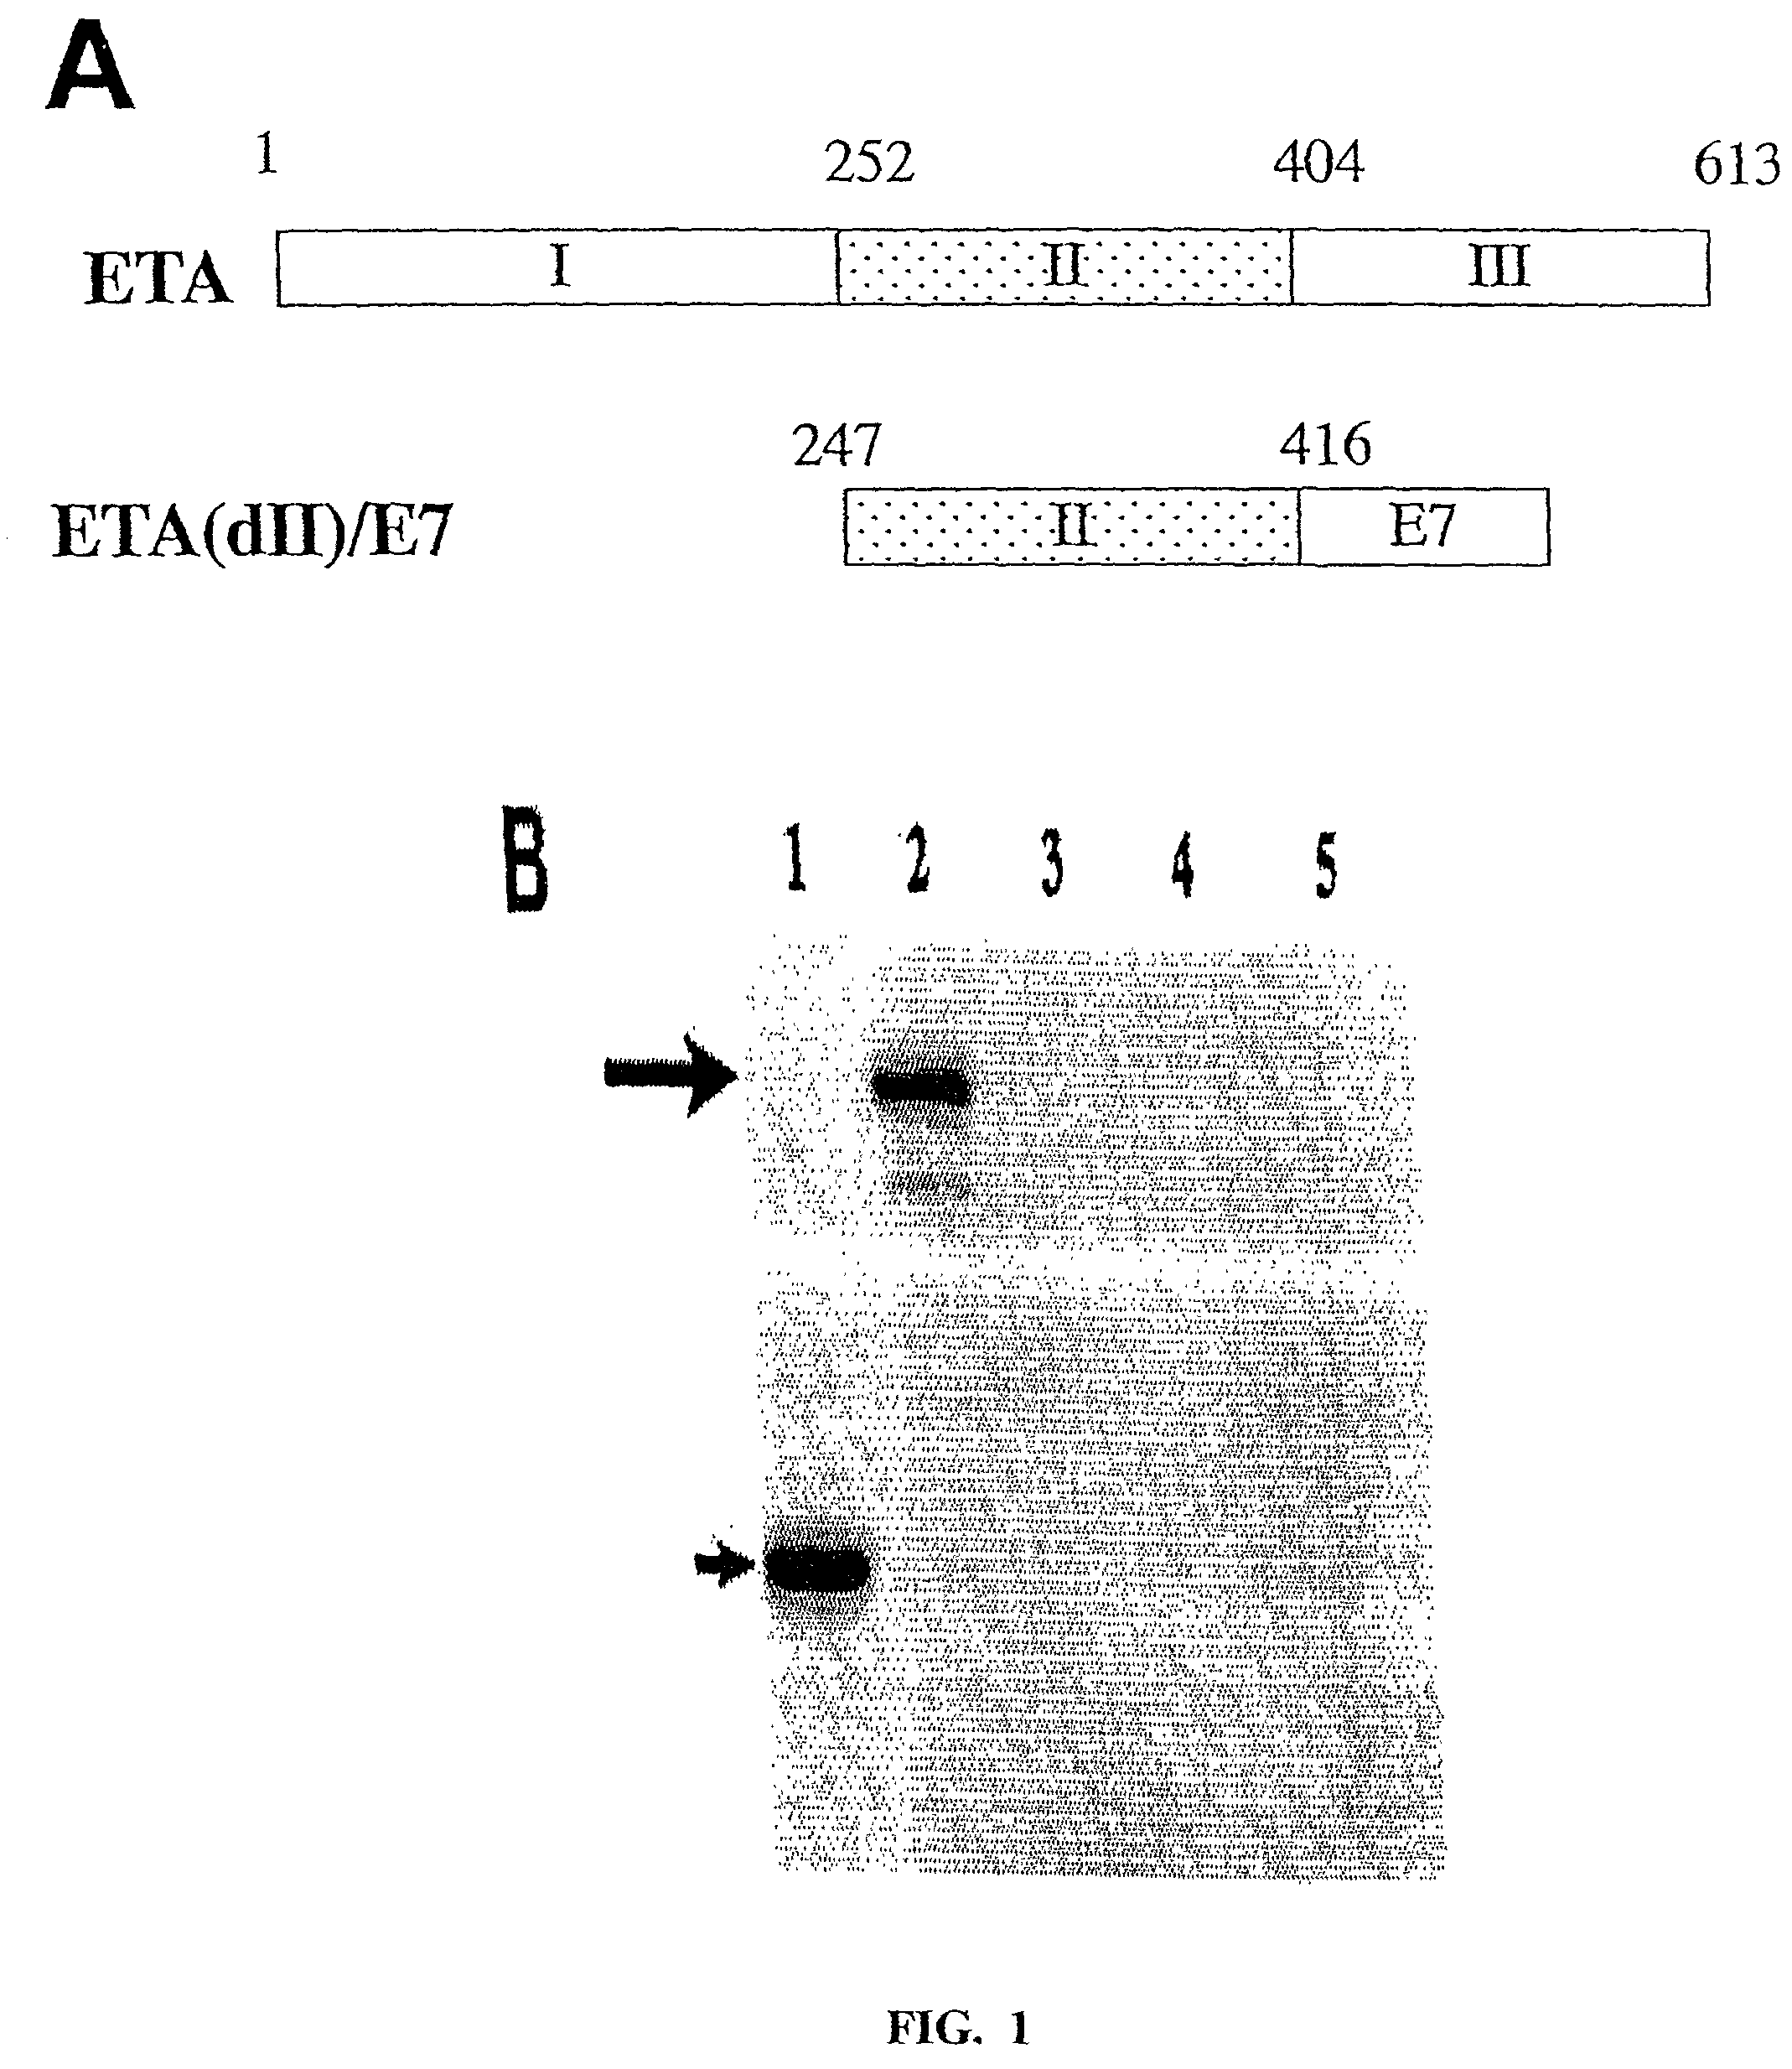 Superior molecular vaccine linking the translocation domain of a bacterial toxin to an antigen